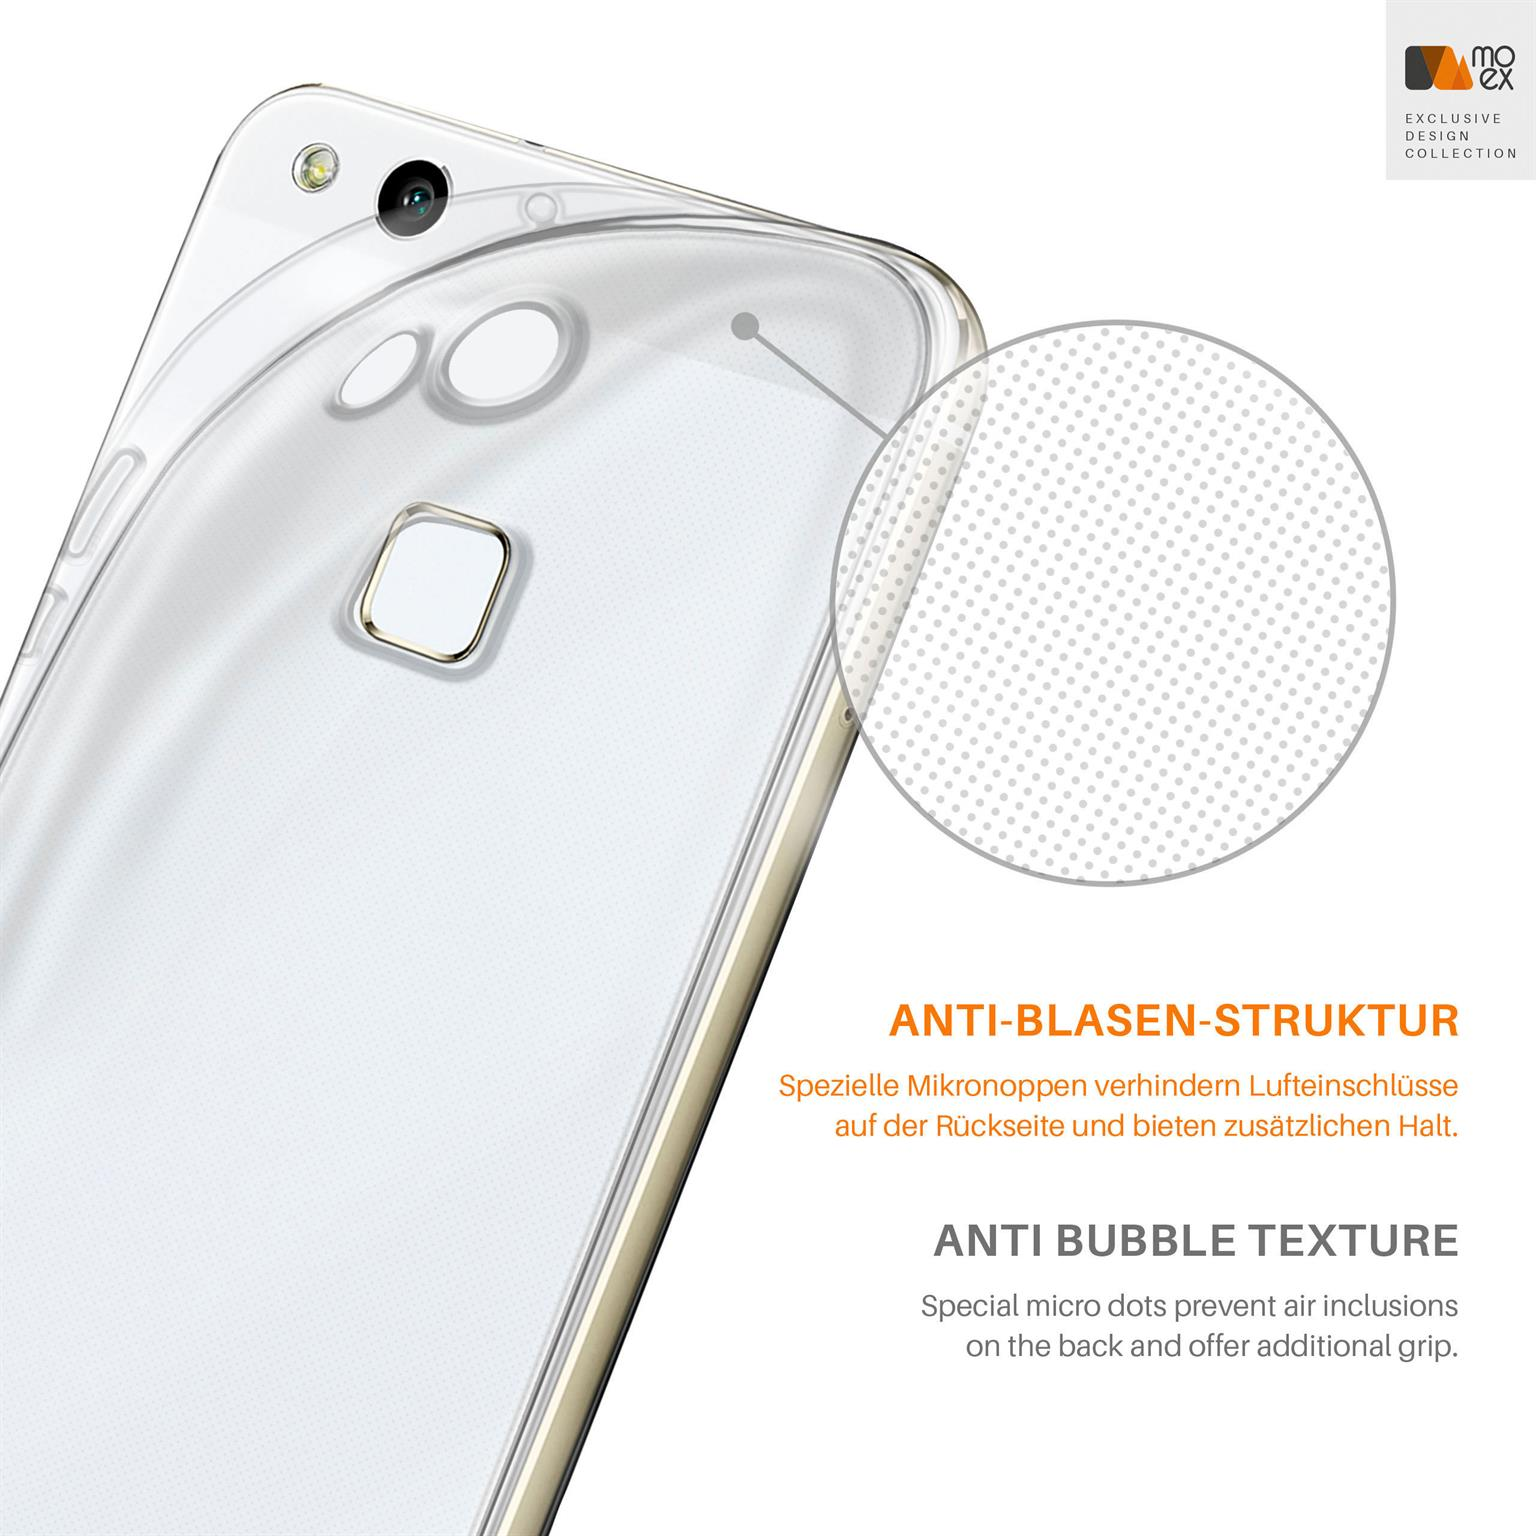 MOEX Aero Case, Backcover, Huawei, P10 Crystal-Clear Lite